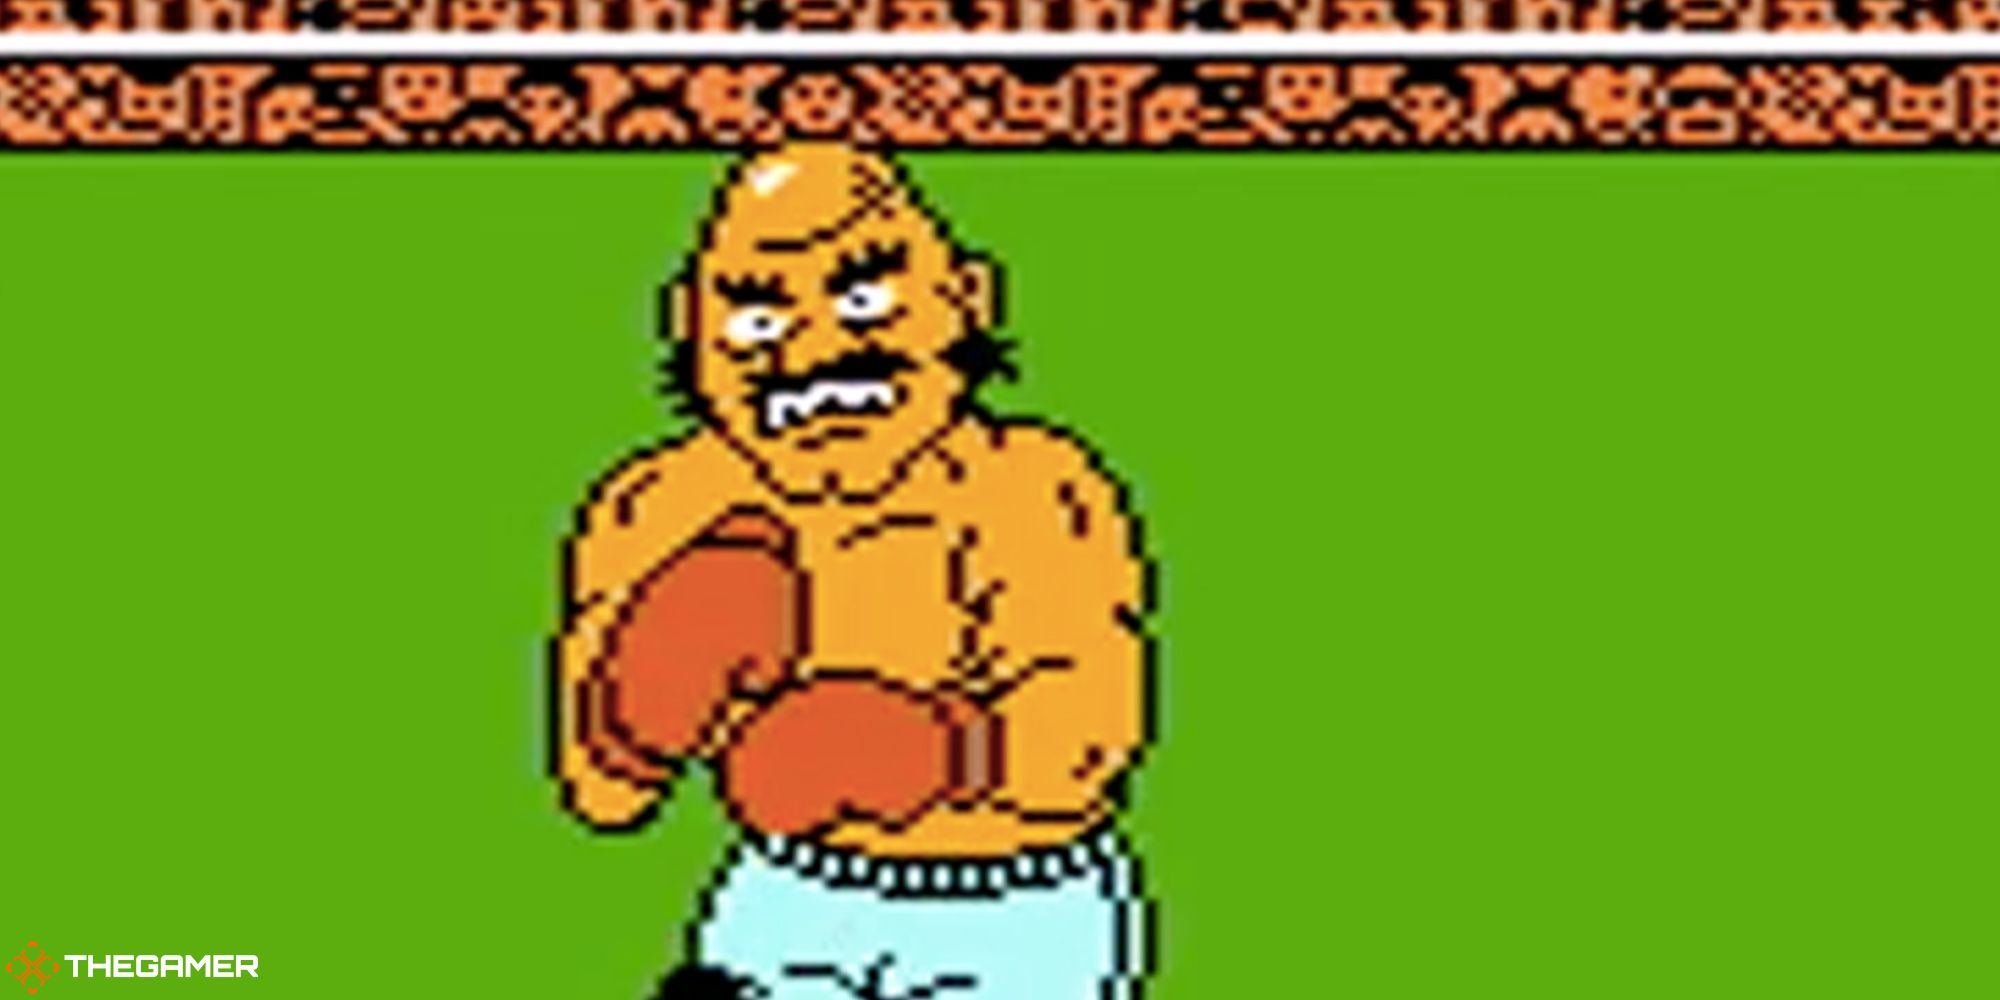 Nintendo's Punch-Out!! - Bald Bull